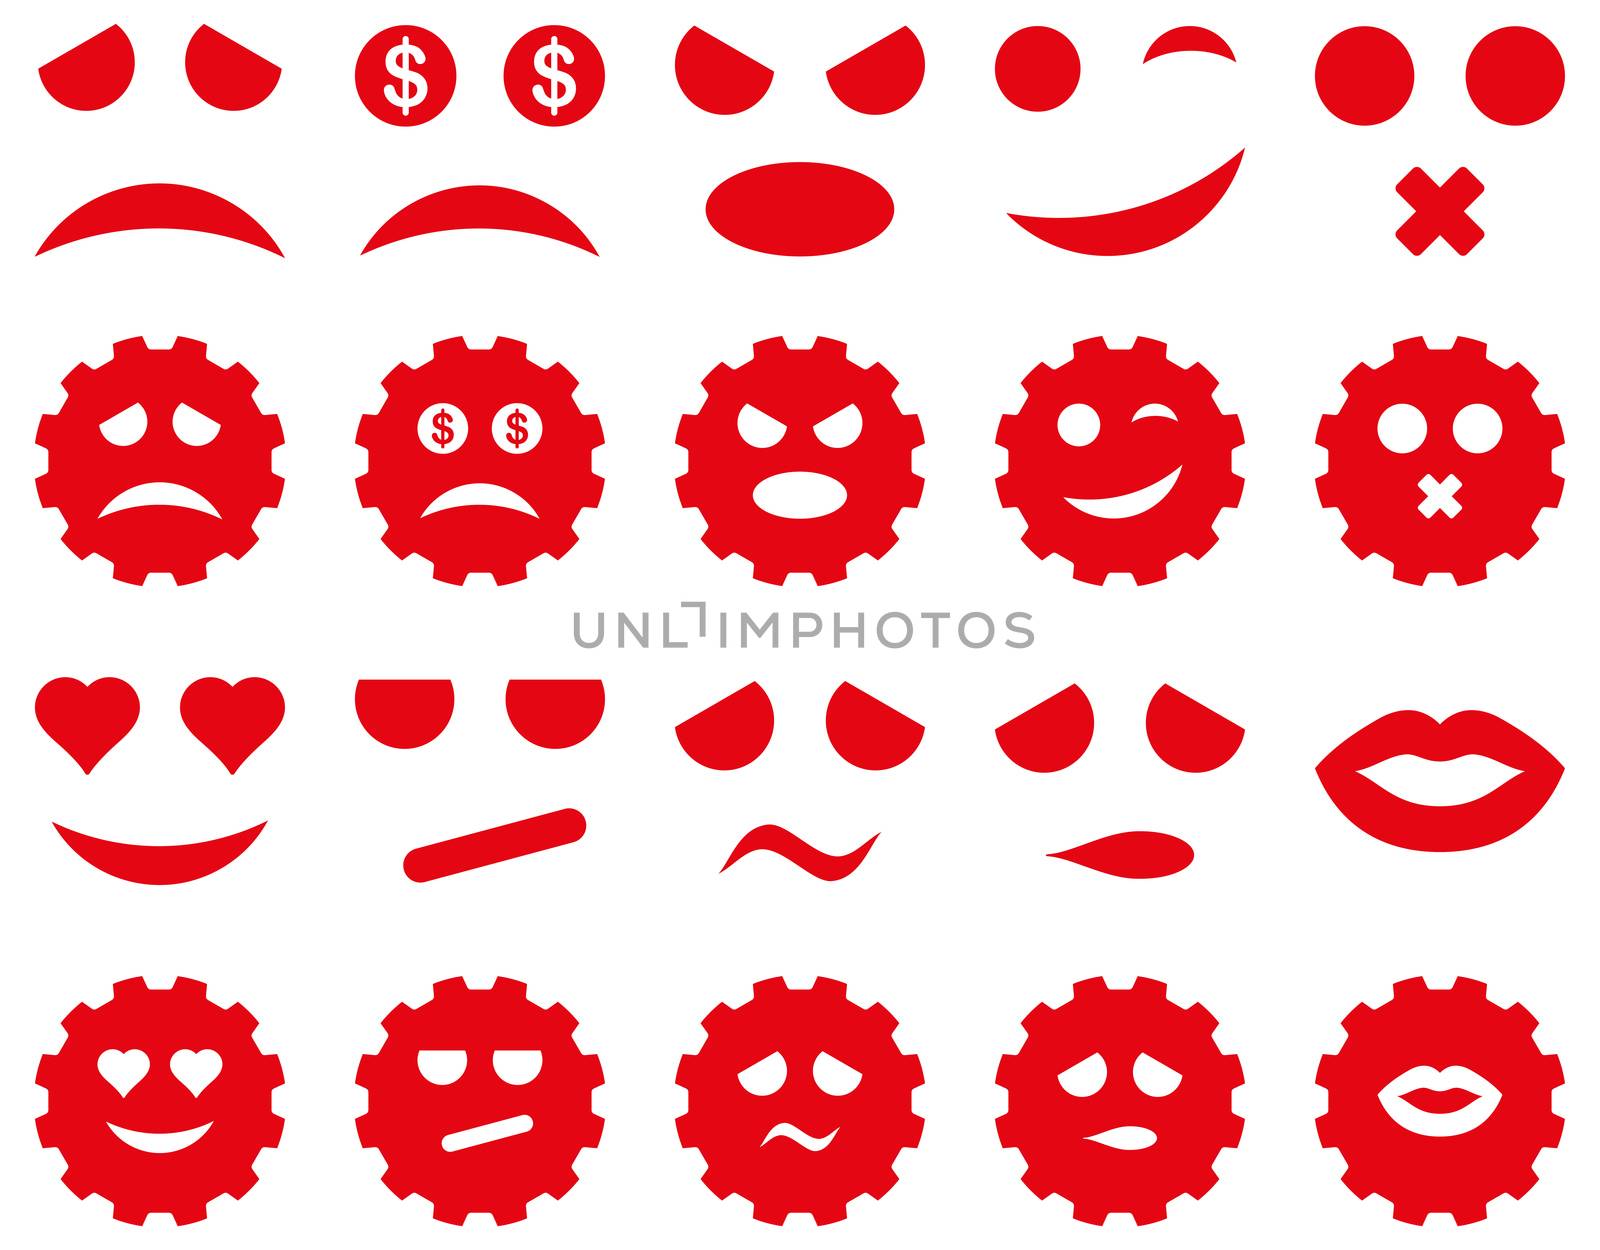 Tool, gear, smile, emotion icons by ahasoft